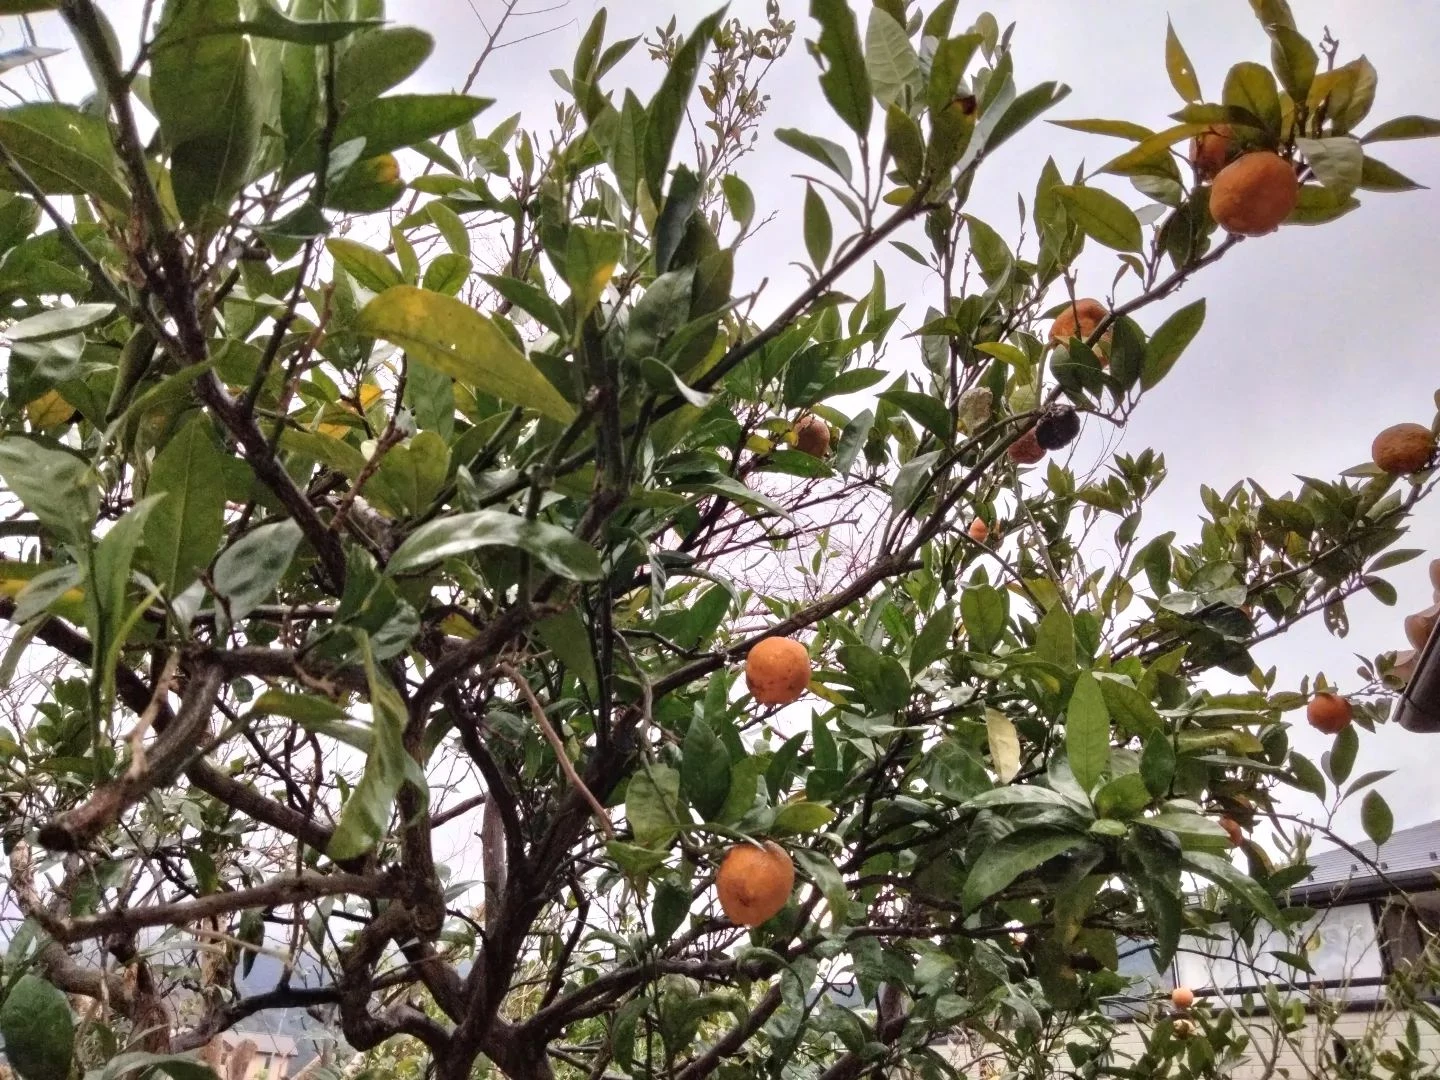 I'm still surprised that oranges actually grow during win...